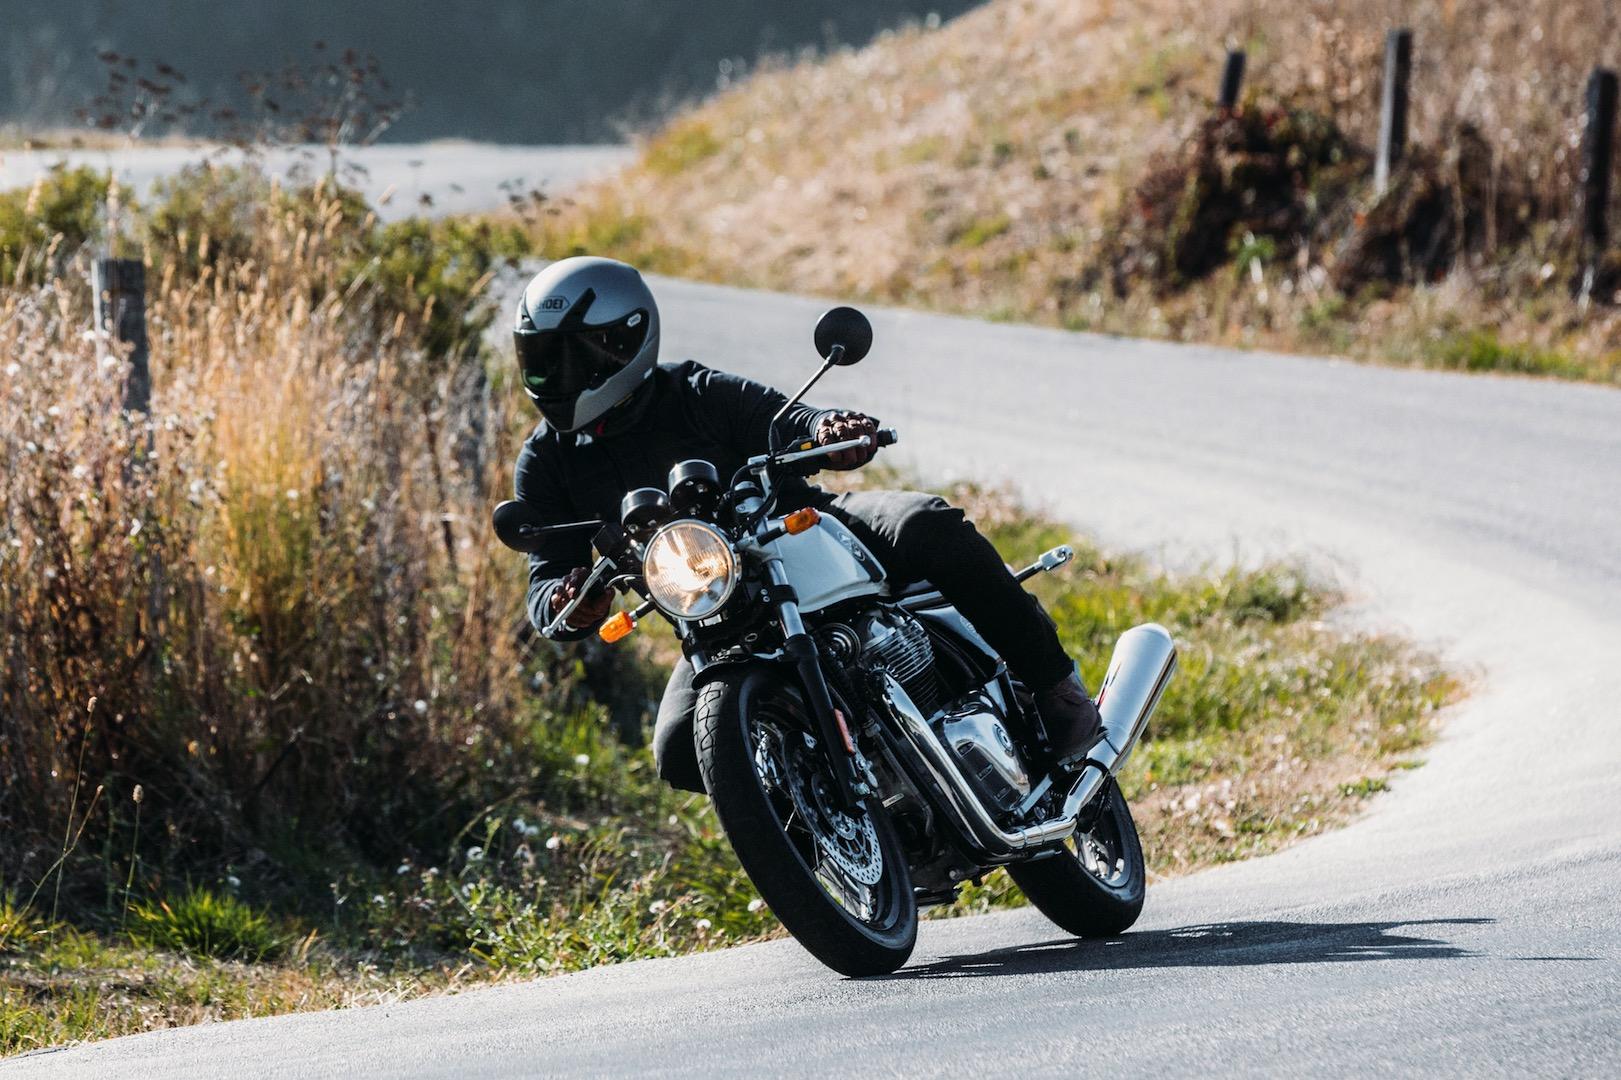 Flipboard: 2019 Royal Enfield Continental GT 650 Review (14 Fast Facts)